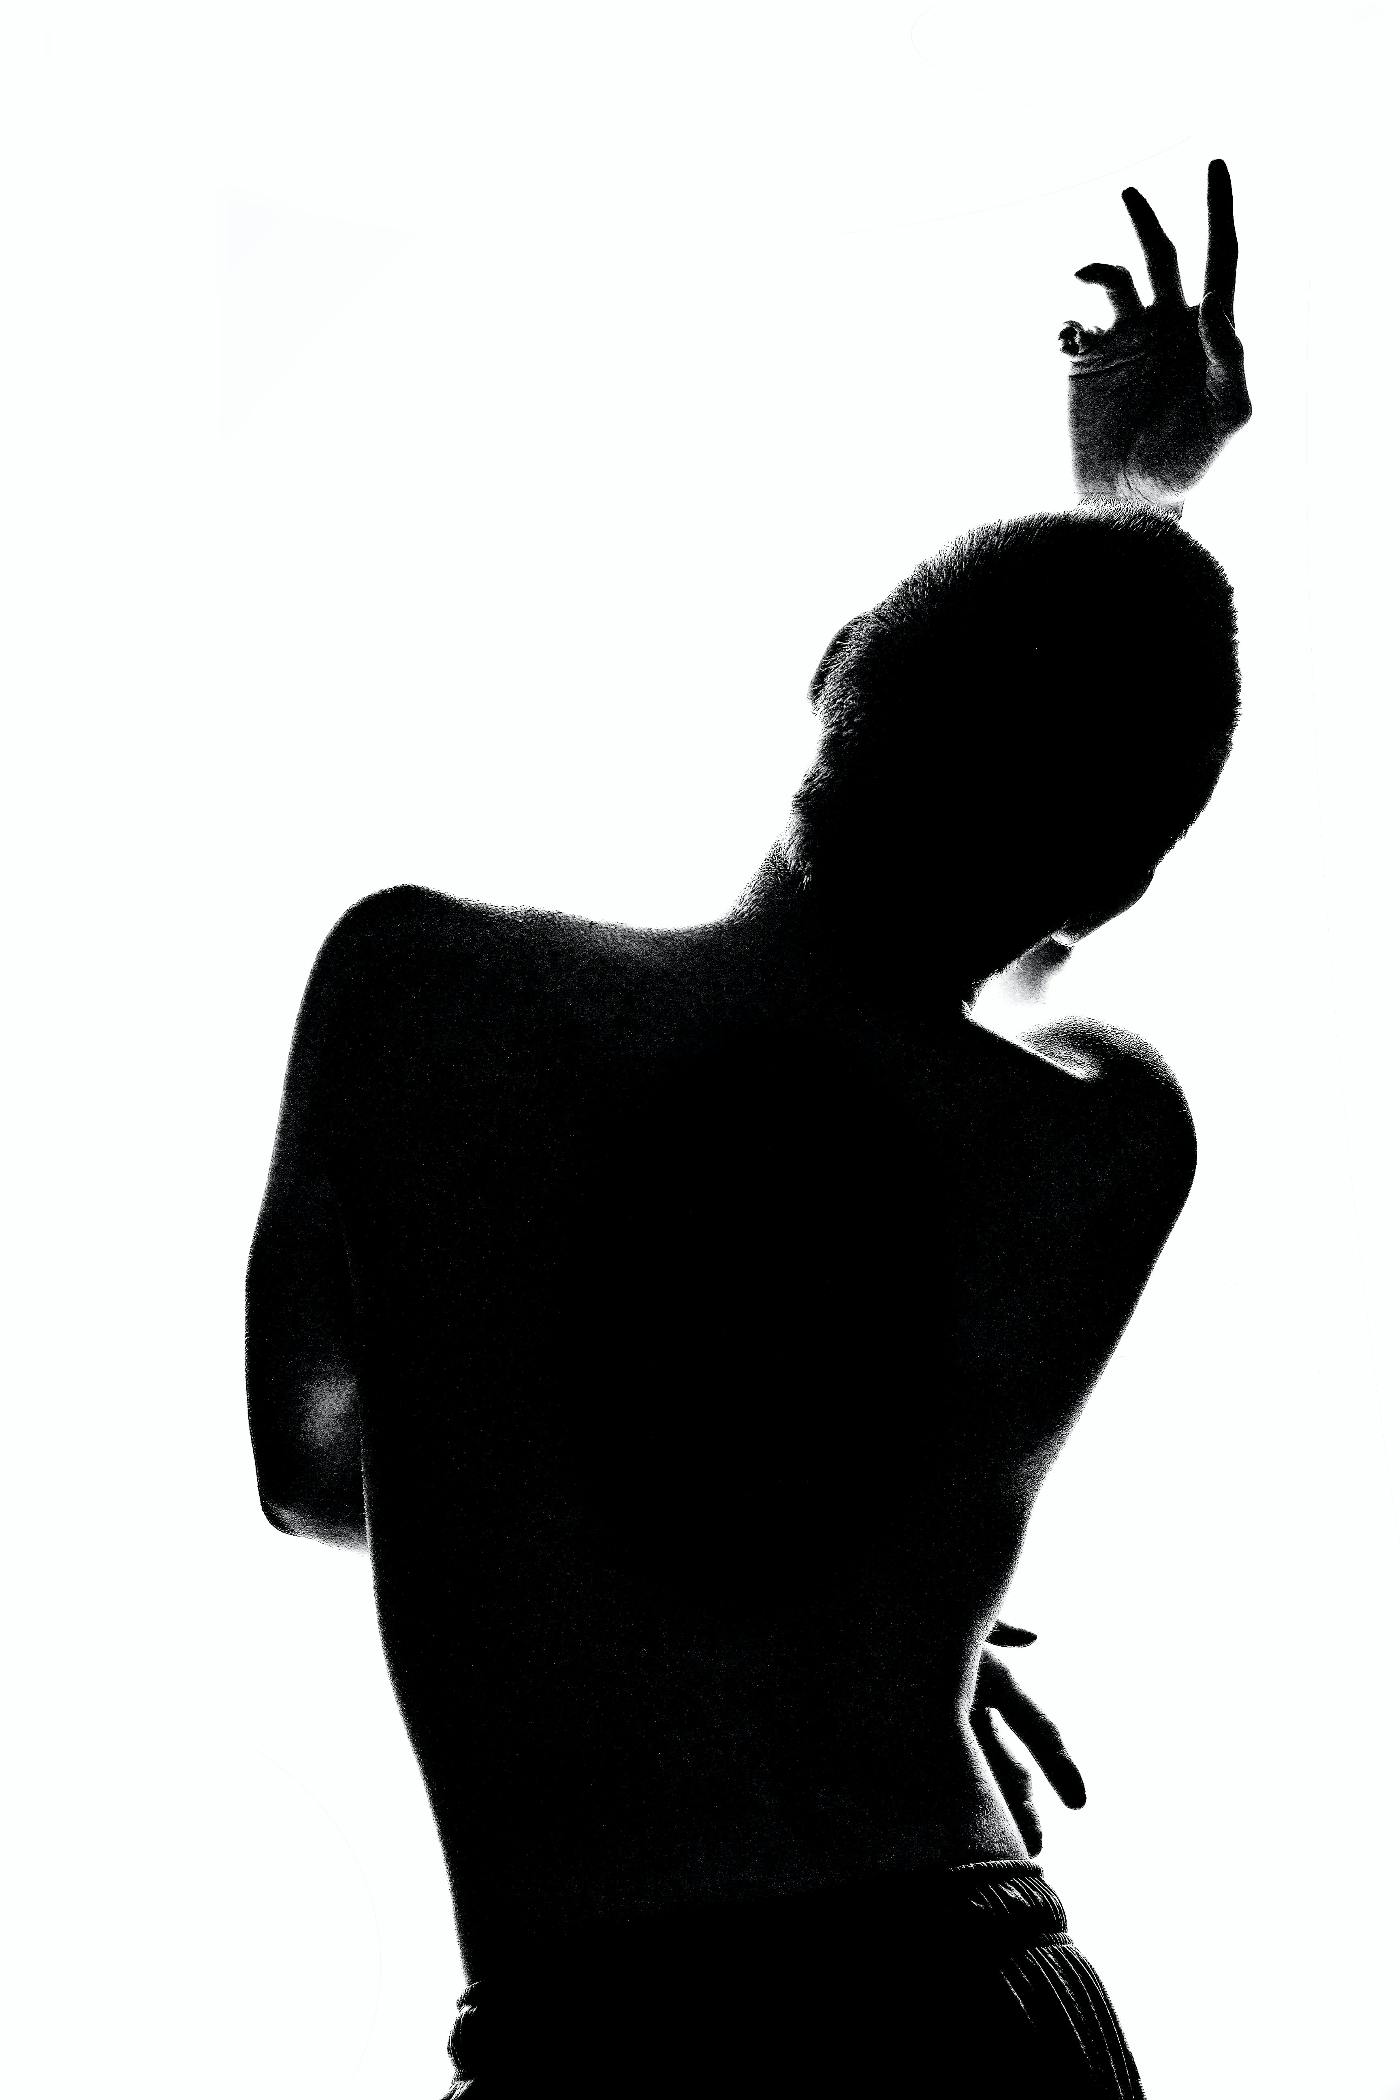 A silhouette of a person dancing